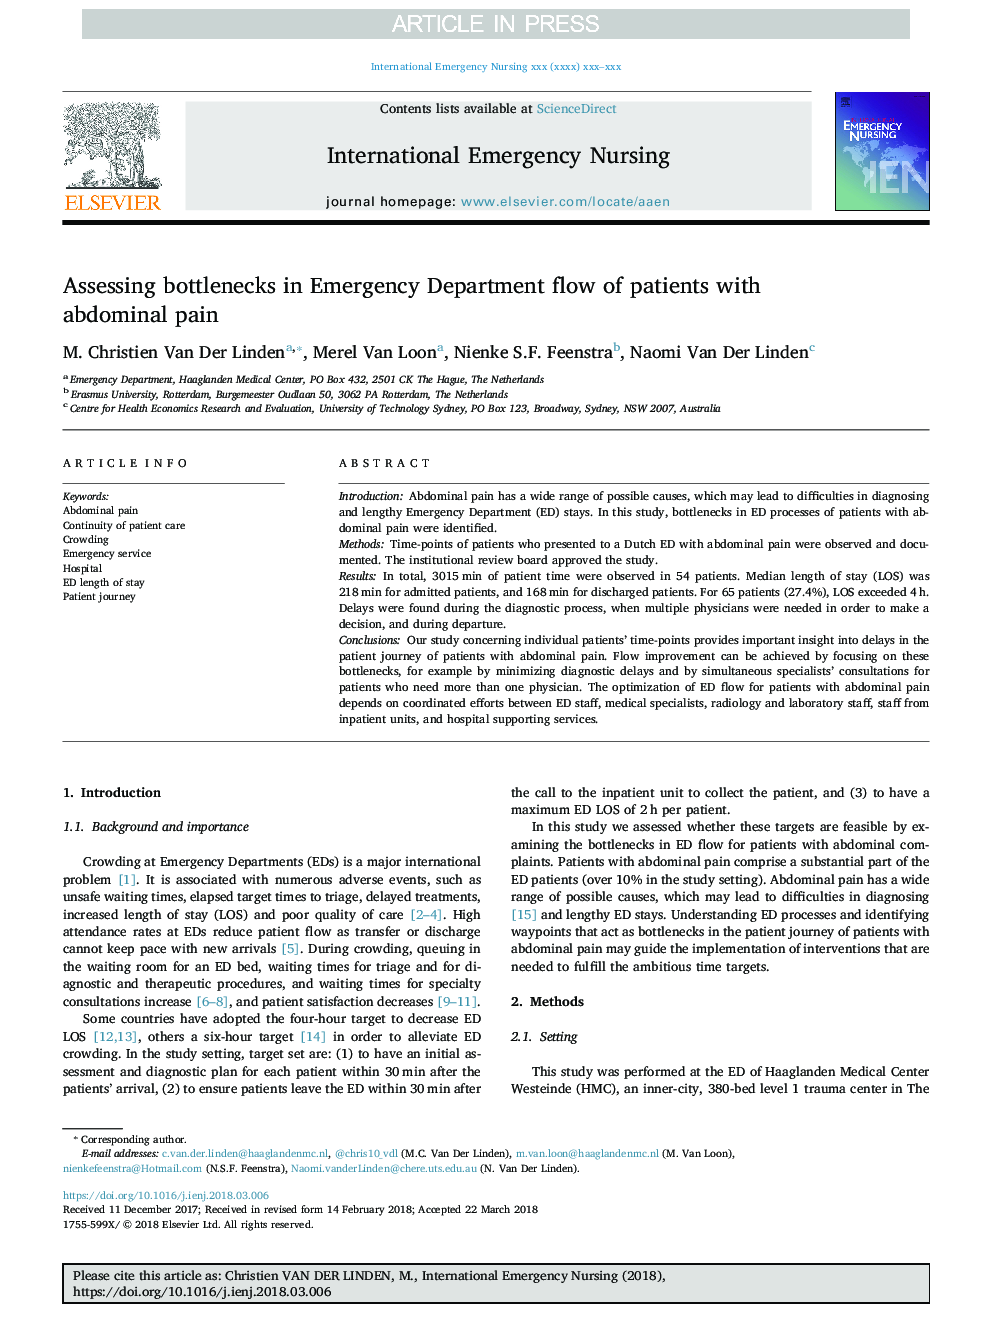 Assessing bottlenecks in Emergency Department flow of patients with abdominal pain